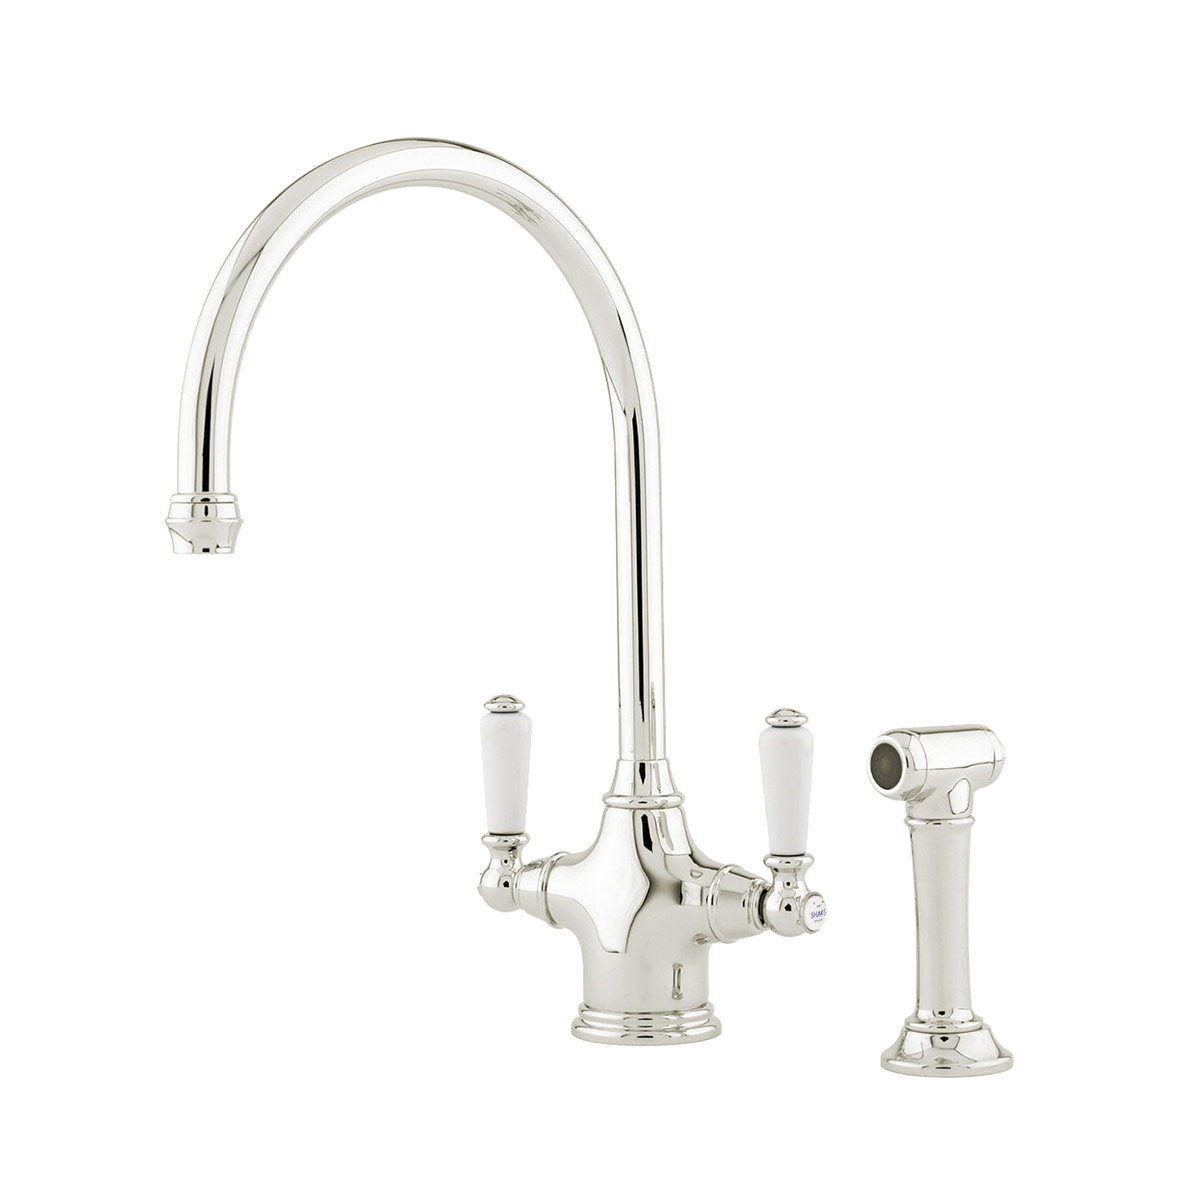 Shaws by Perrin & Rowe Ribble kitchen mixer with spray rinse in Nickel. Phoenician style monobloc kitchen tap AUSH.4360. Distributed in Australia by Luxe by Design, Brisbane.